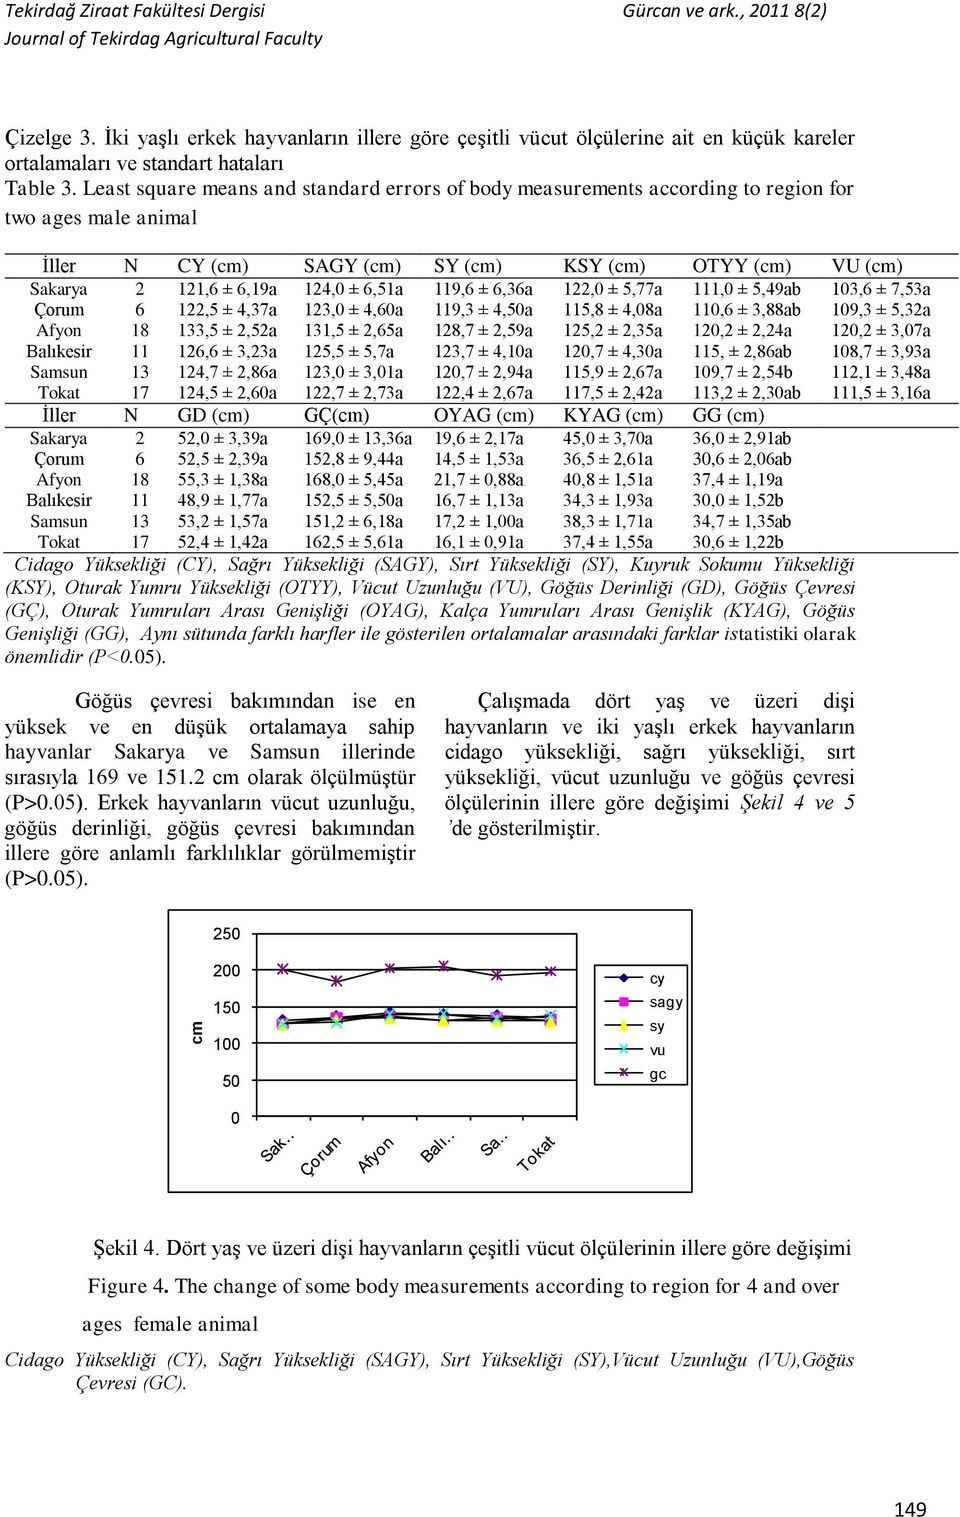 Least square means and standard errors of body measurements according to region for two ages male animal İller N CY (cm) SAGY (cm) SY (cm) KSY (cm) OTYY (cm) VU (cm) Sakarya 2 121,6 ± 6,19a 124,0 ±